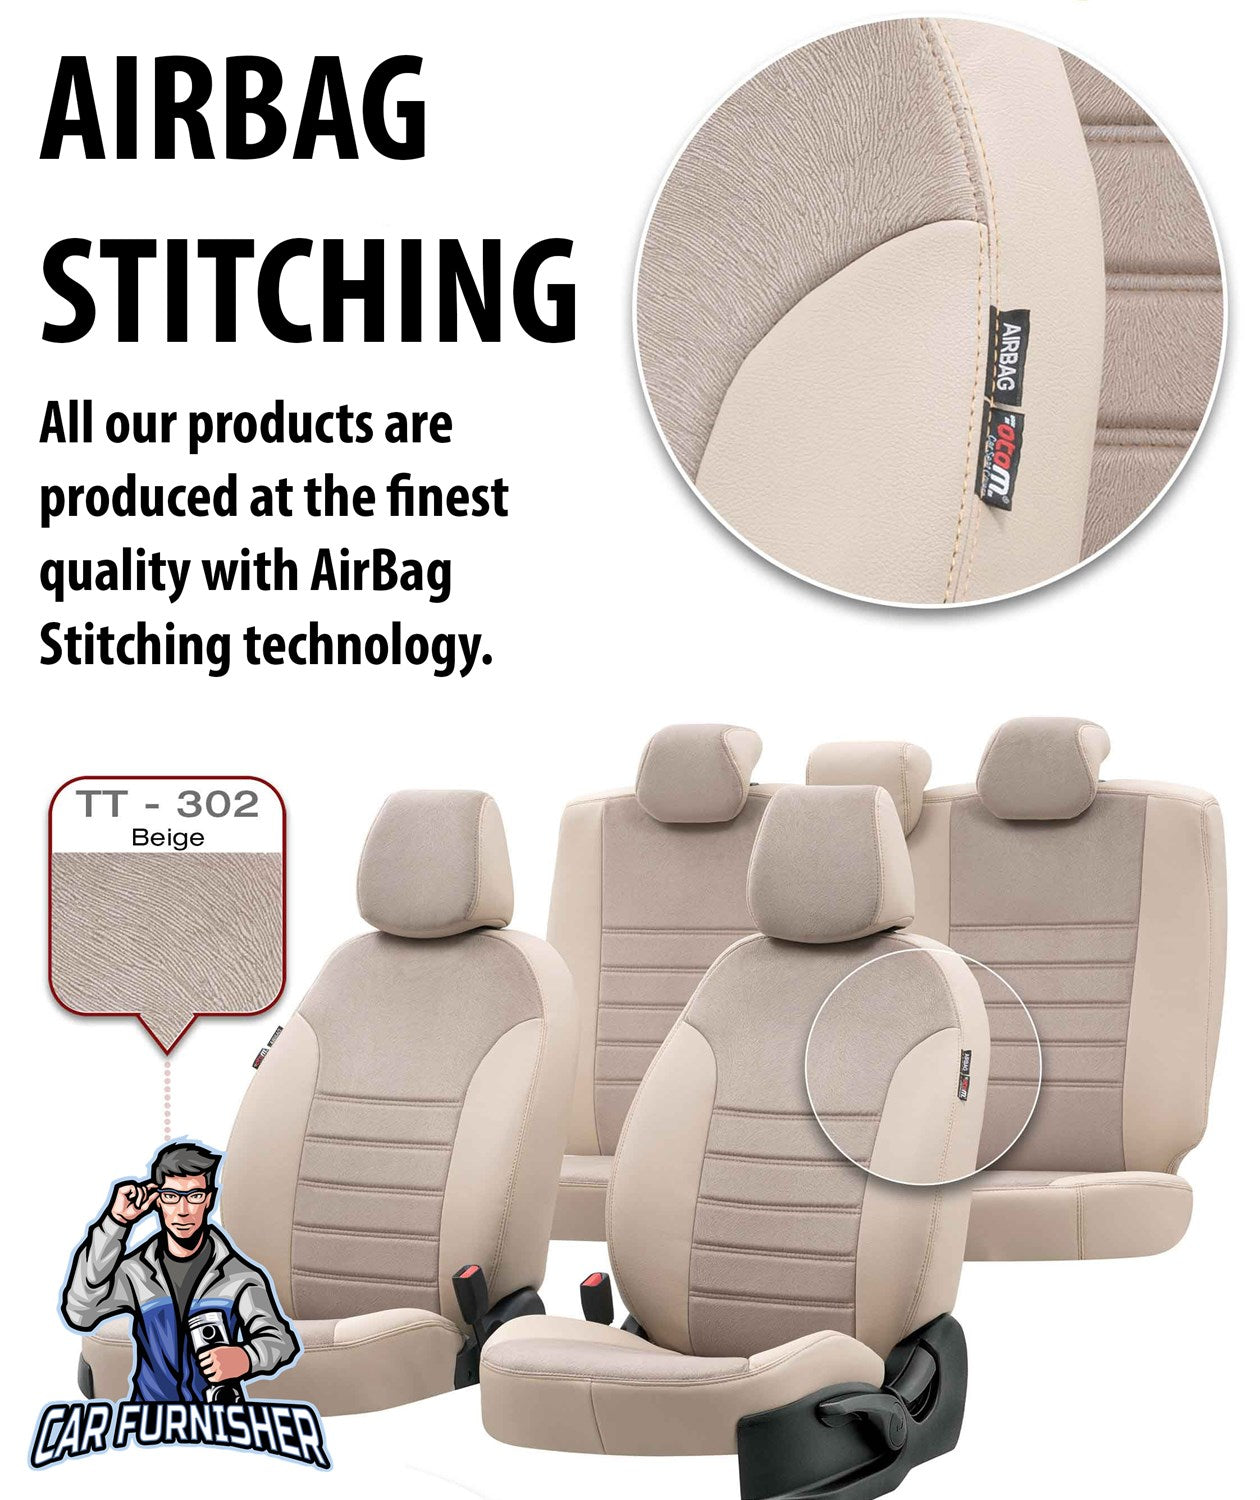 Jeep Grand Cherokee Seat Cover London Foal Feather Design Beige Leather & Foal Feather